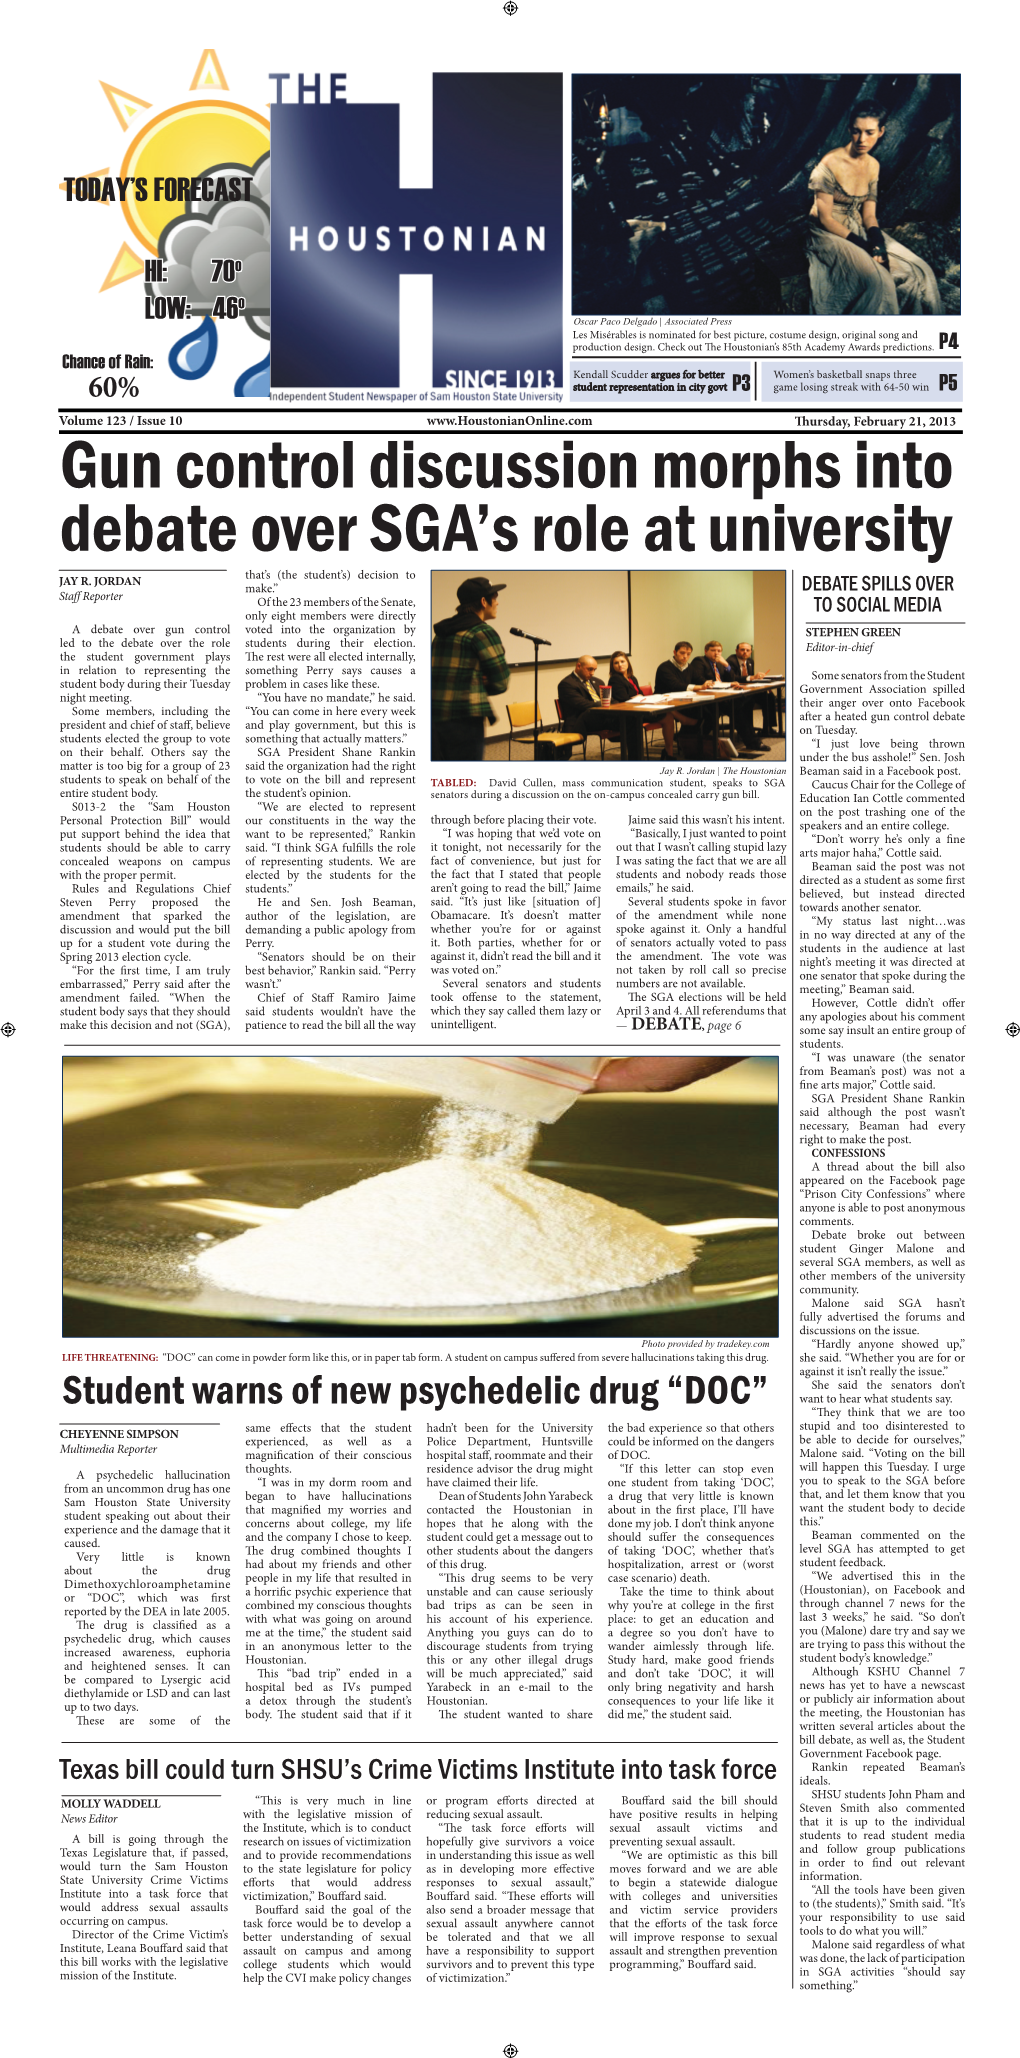 Gun Control Discussion Morphs Into Debate Over SGA's Role at University